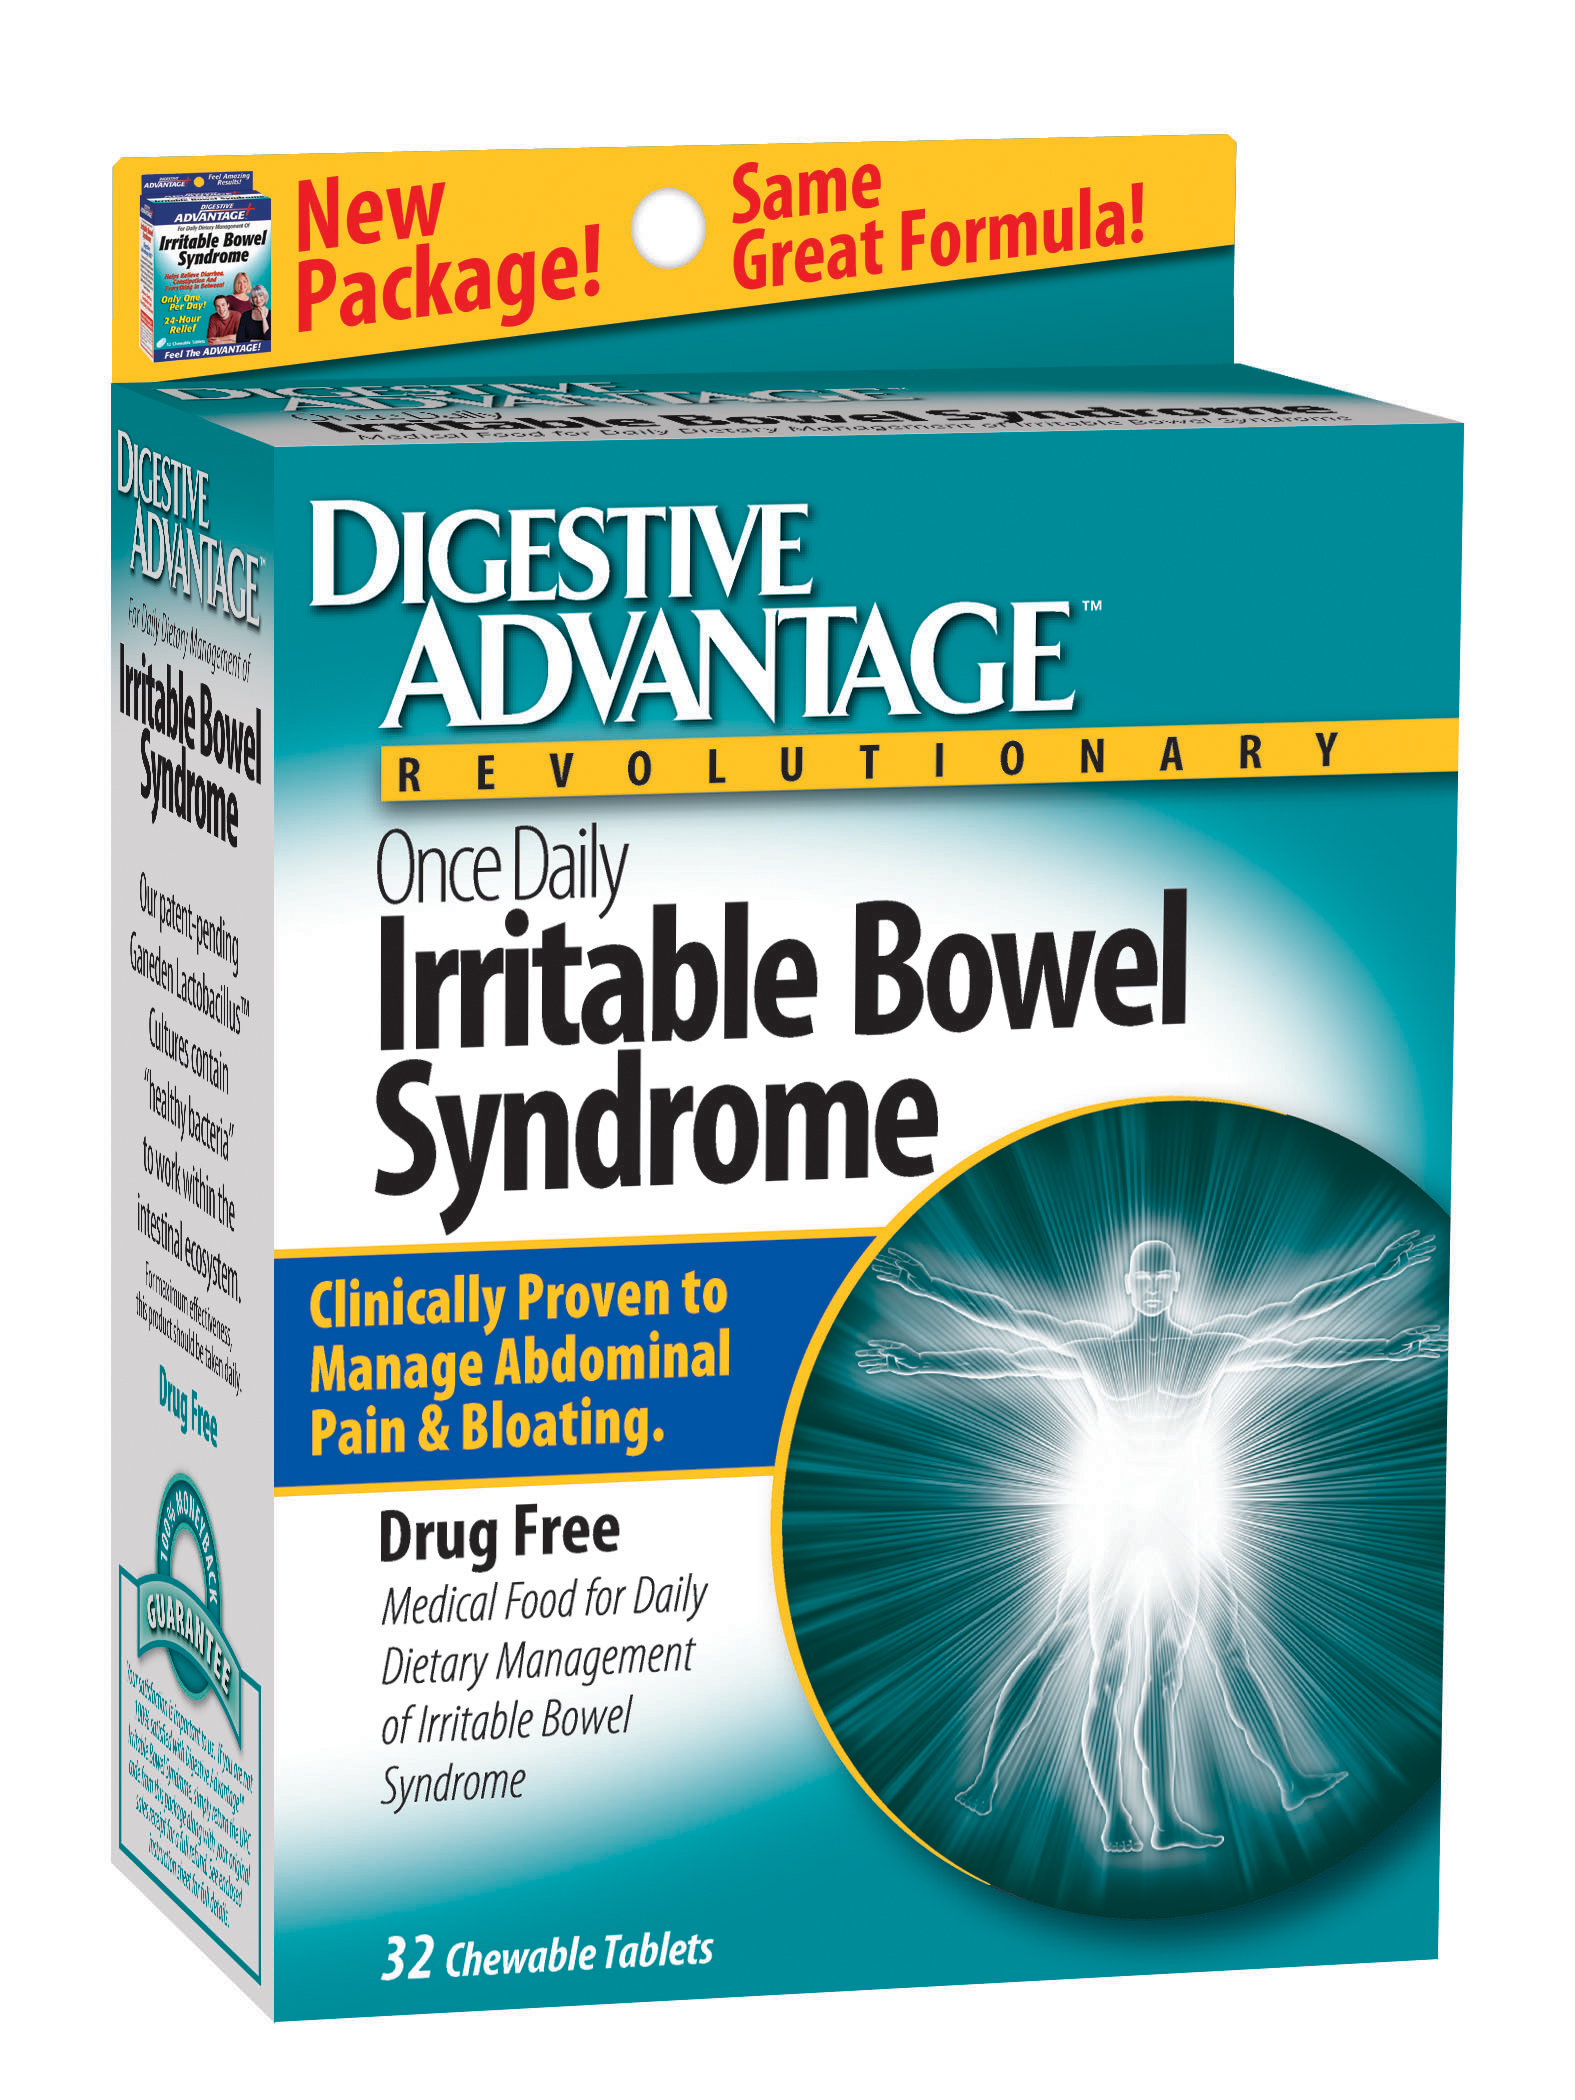 ClinicallyProven Probiotic for Irritable Bowel Syndrome